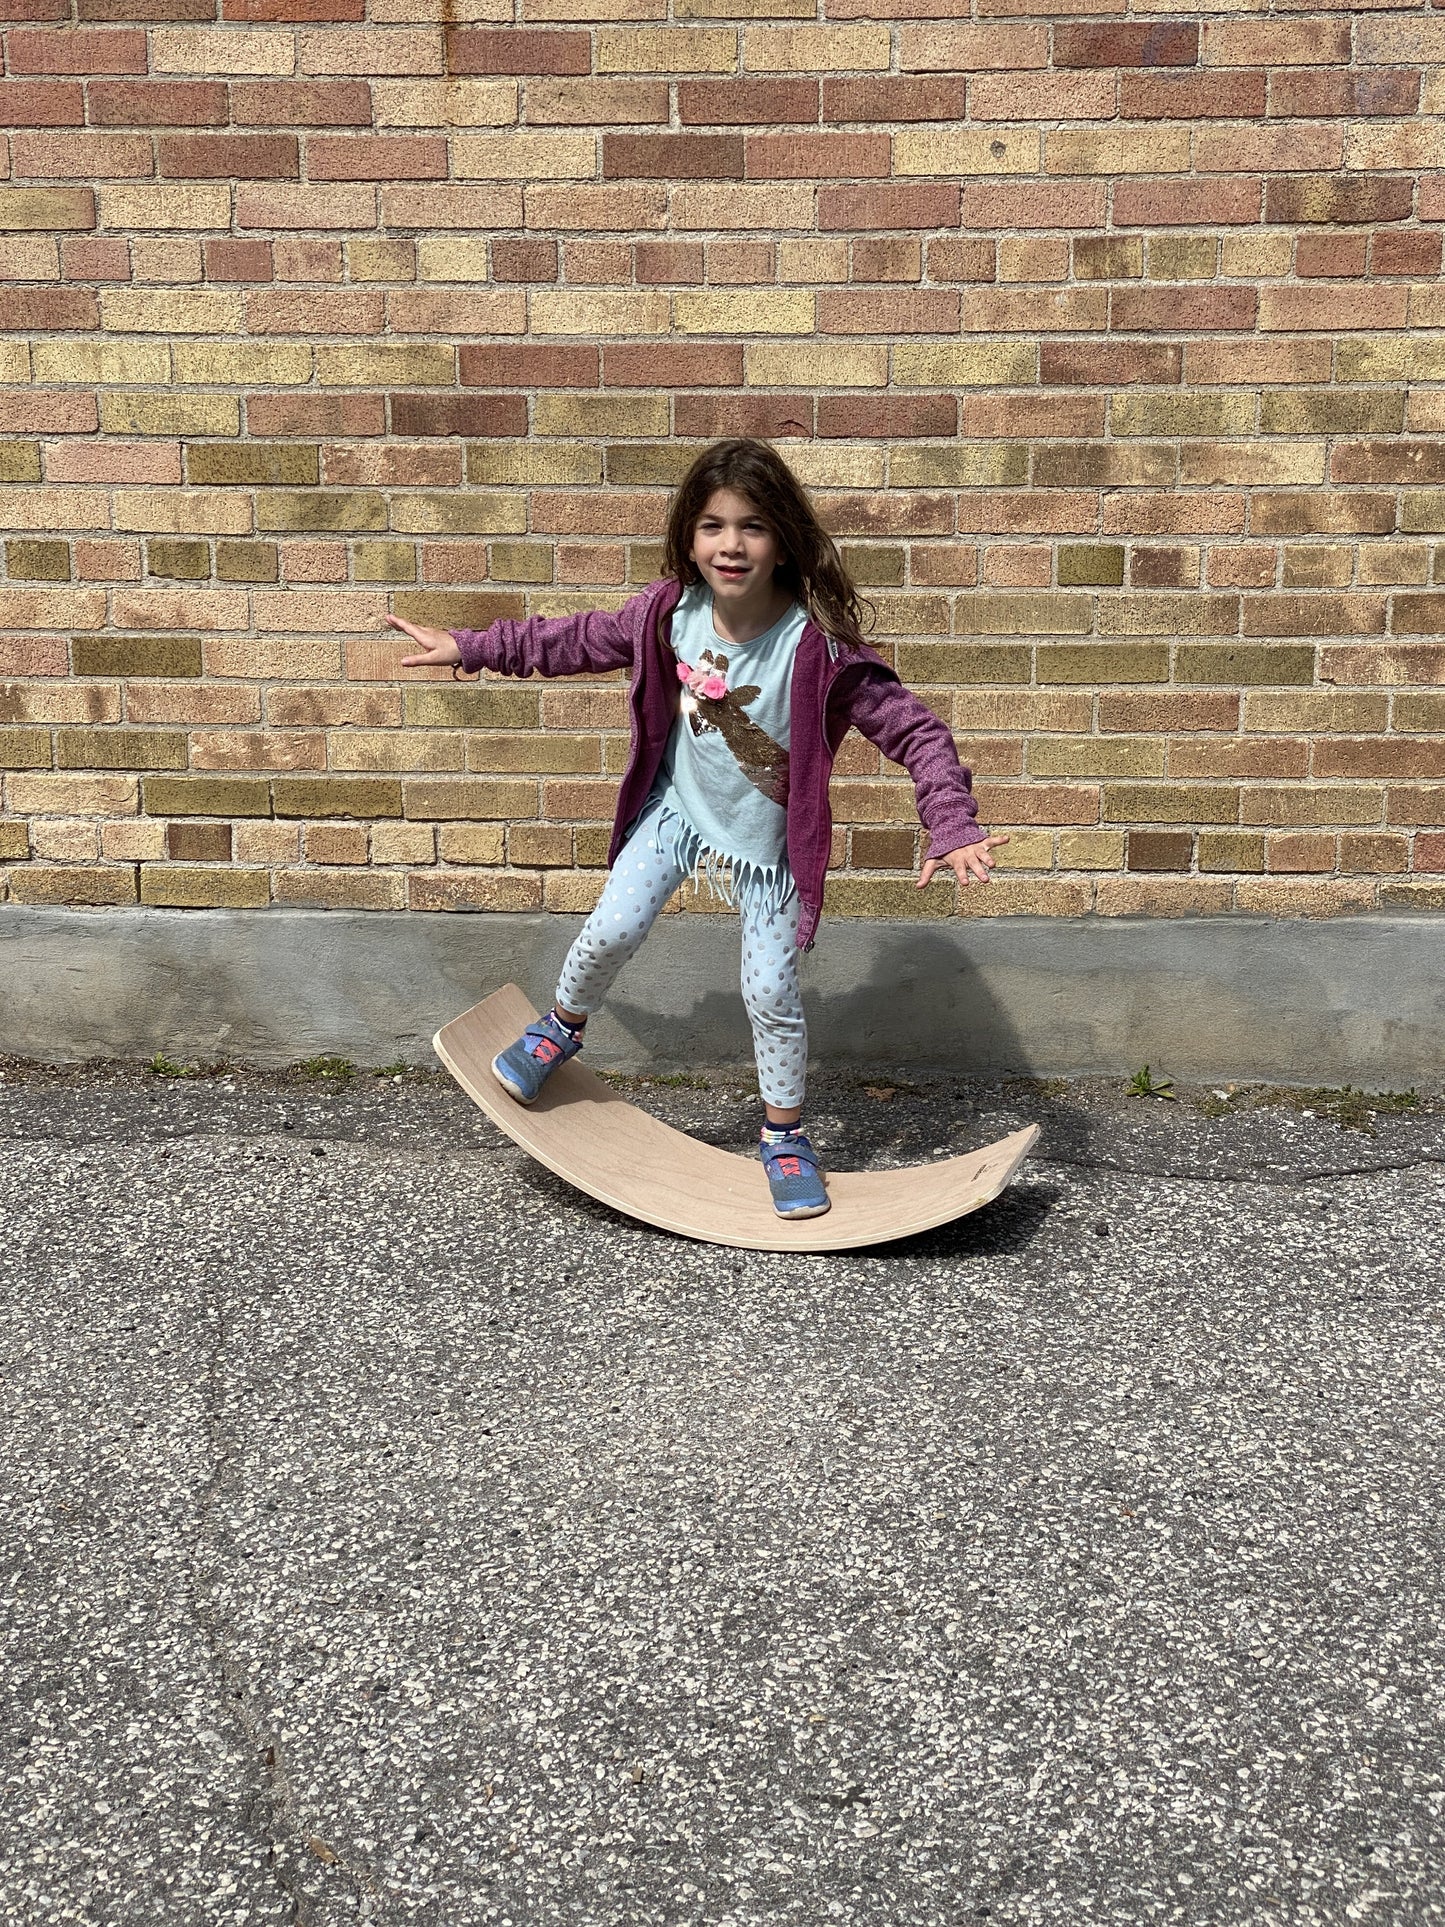 The KidBoard Balance Board is the ultimate in open-ended play